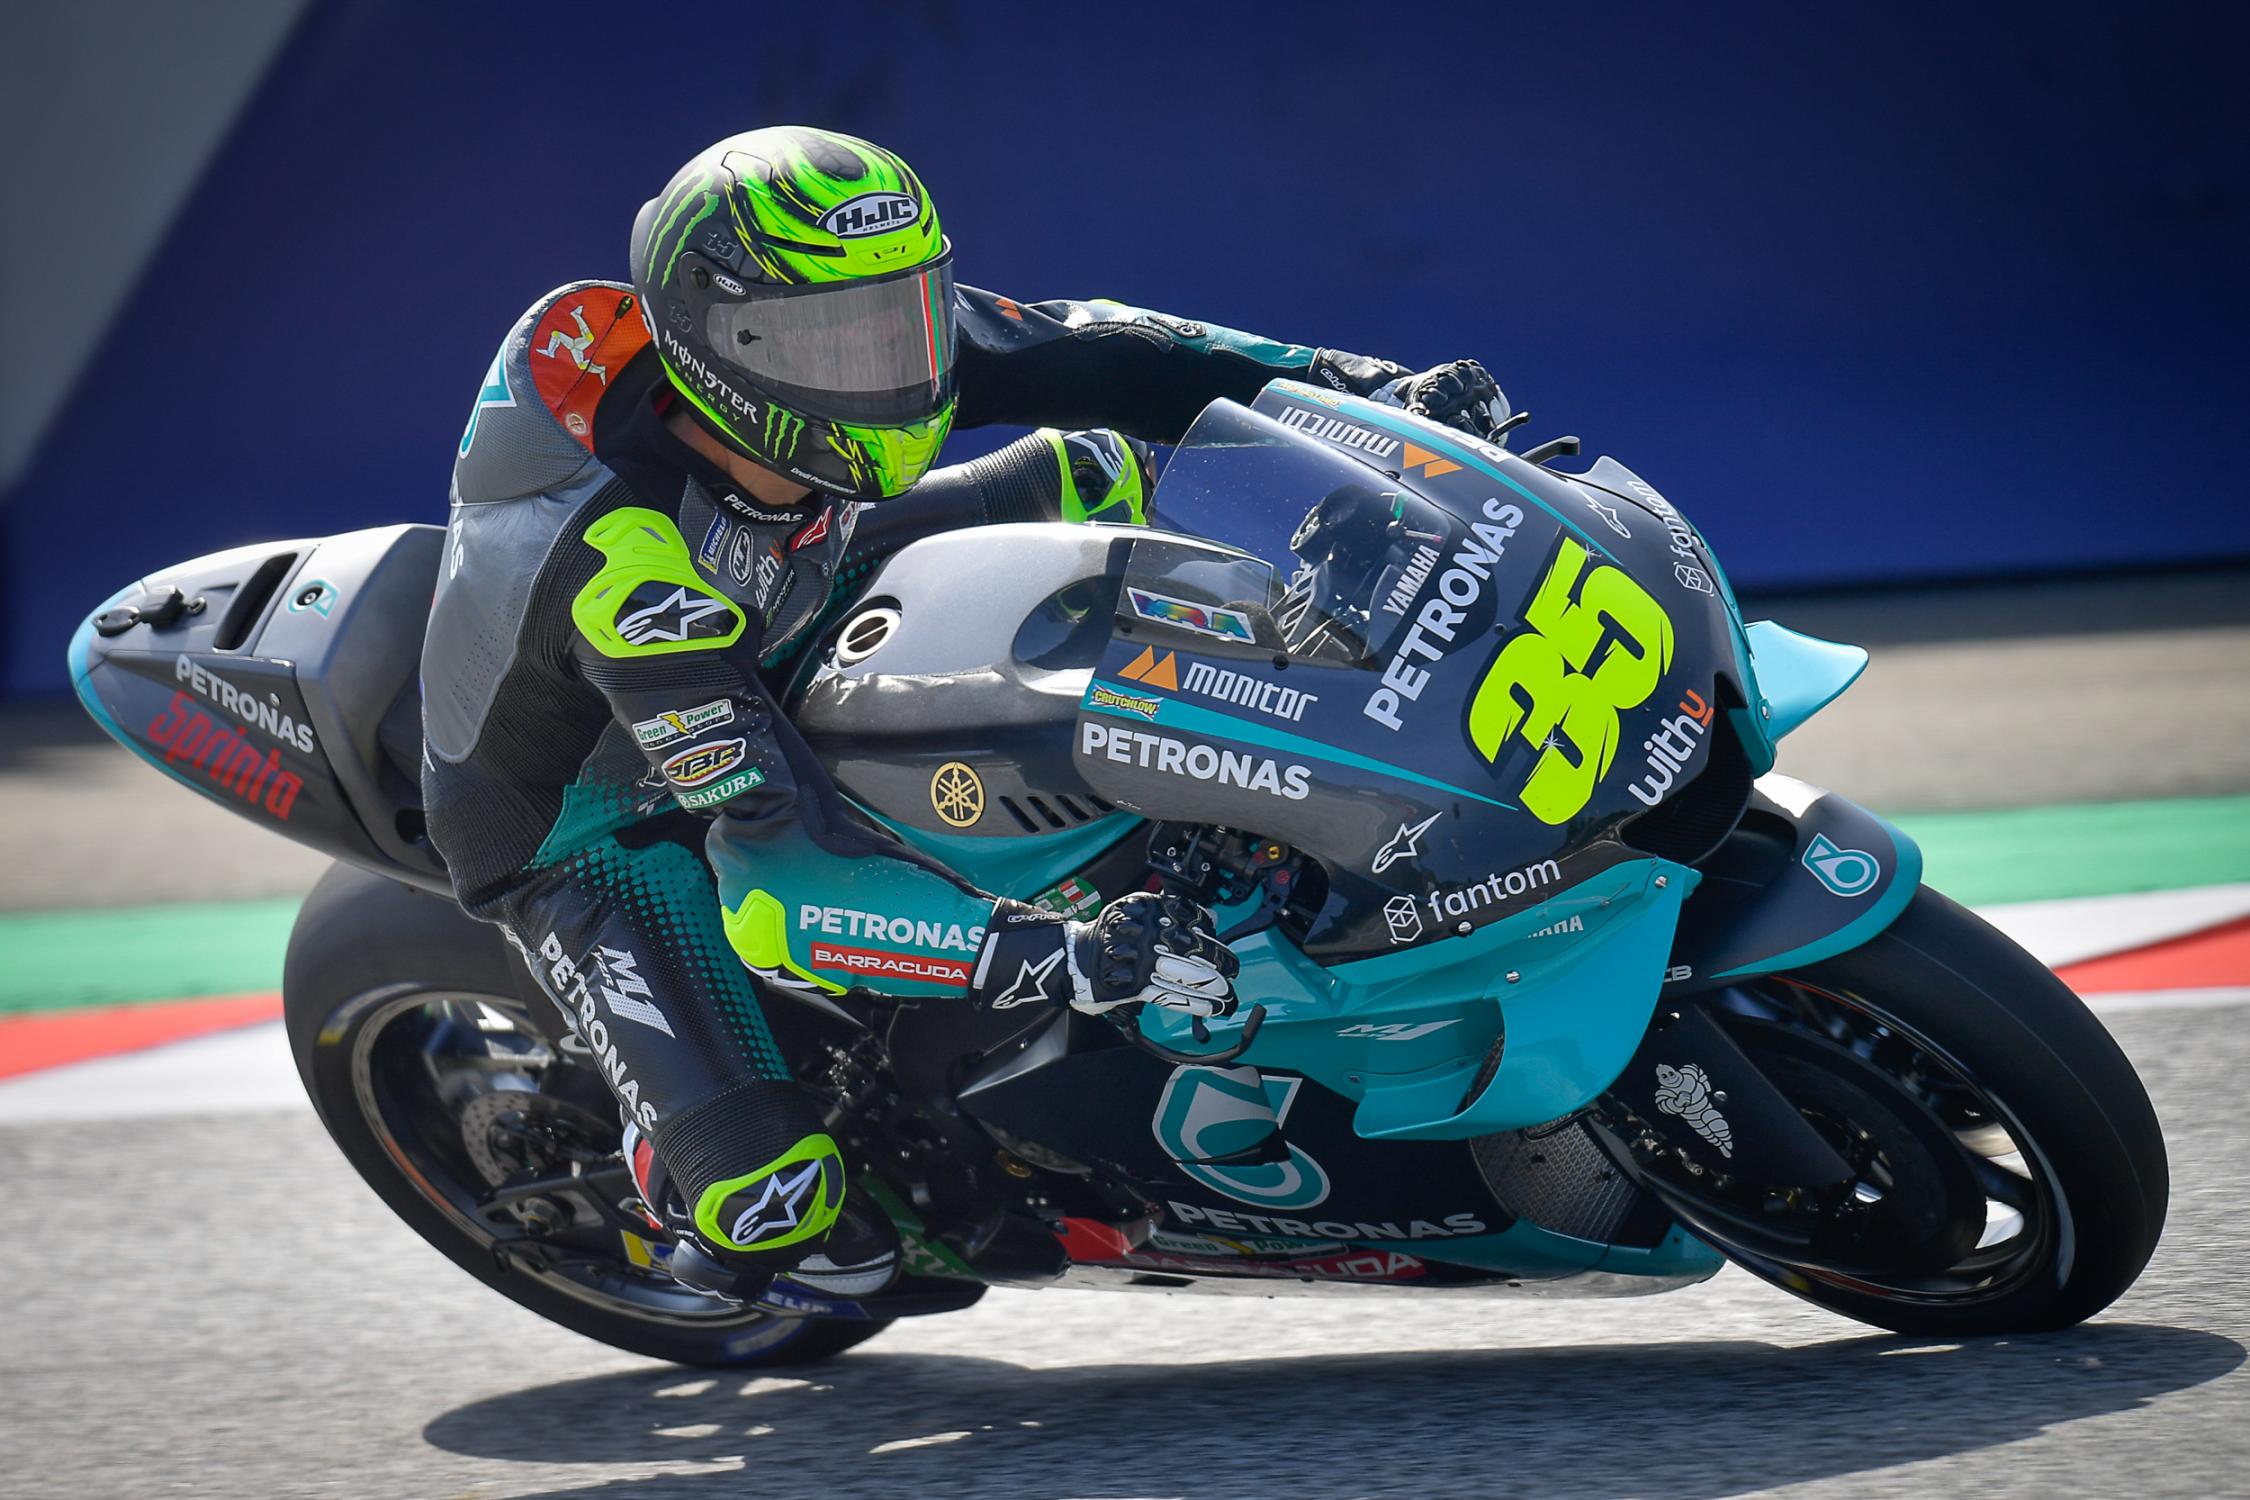 Crutchlow 20th after first day in Austrian GP